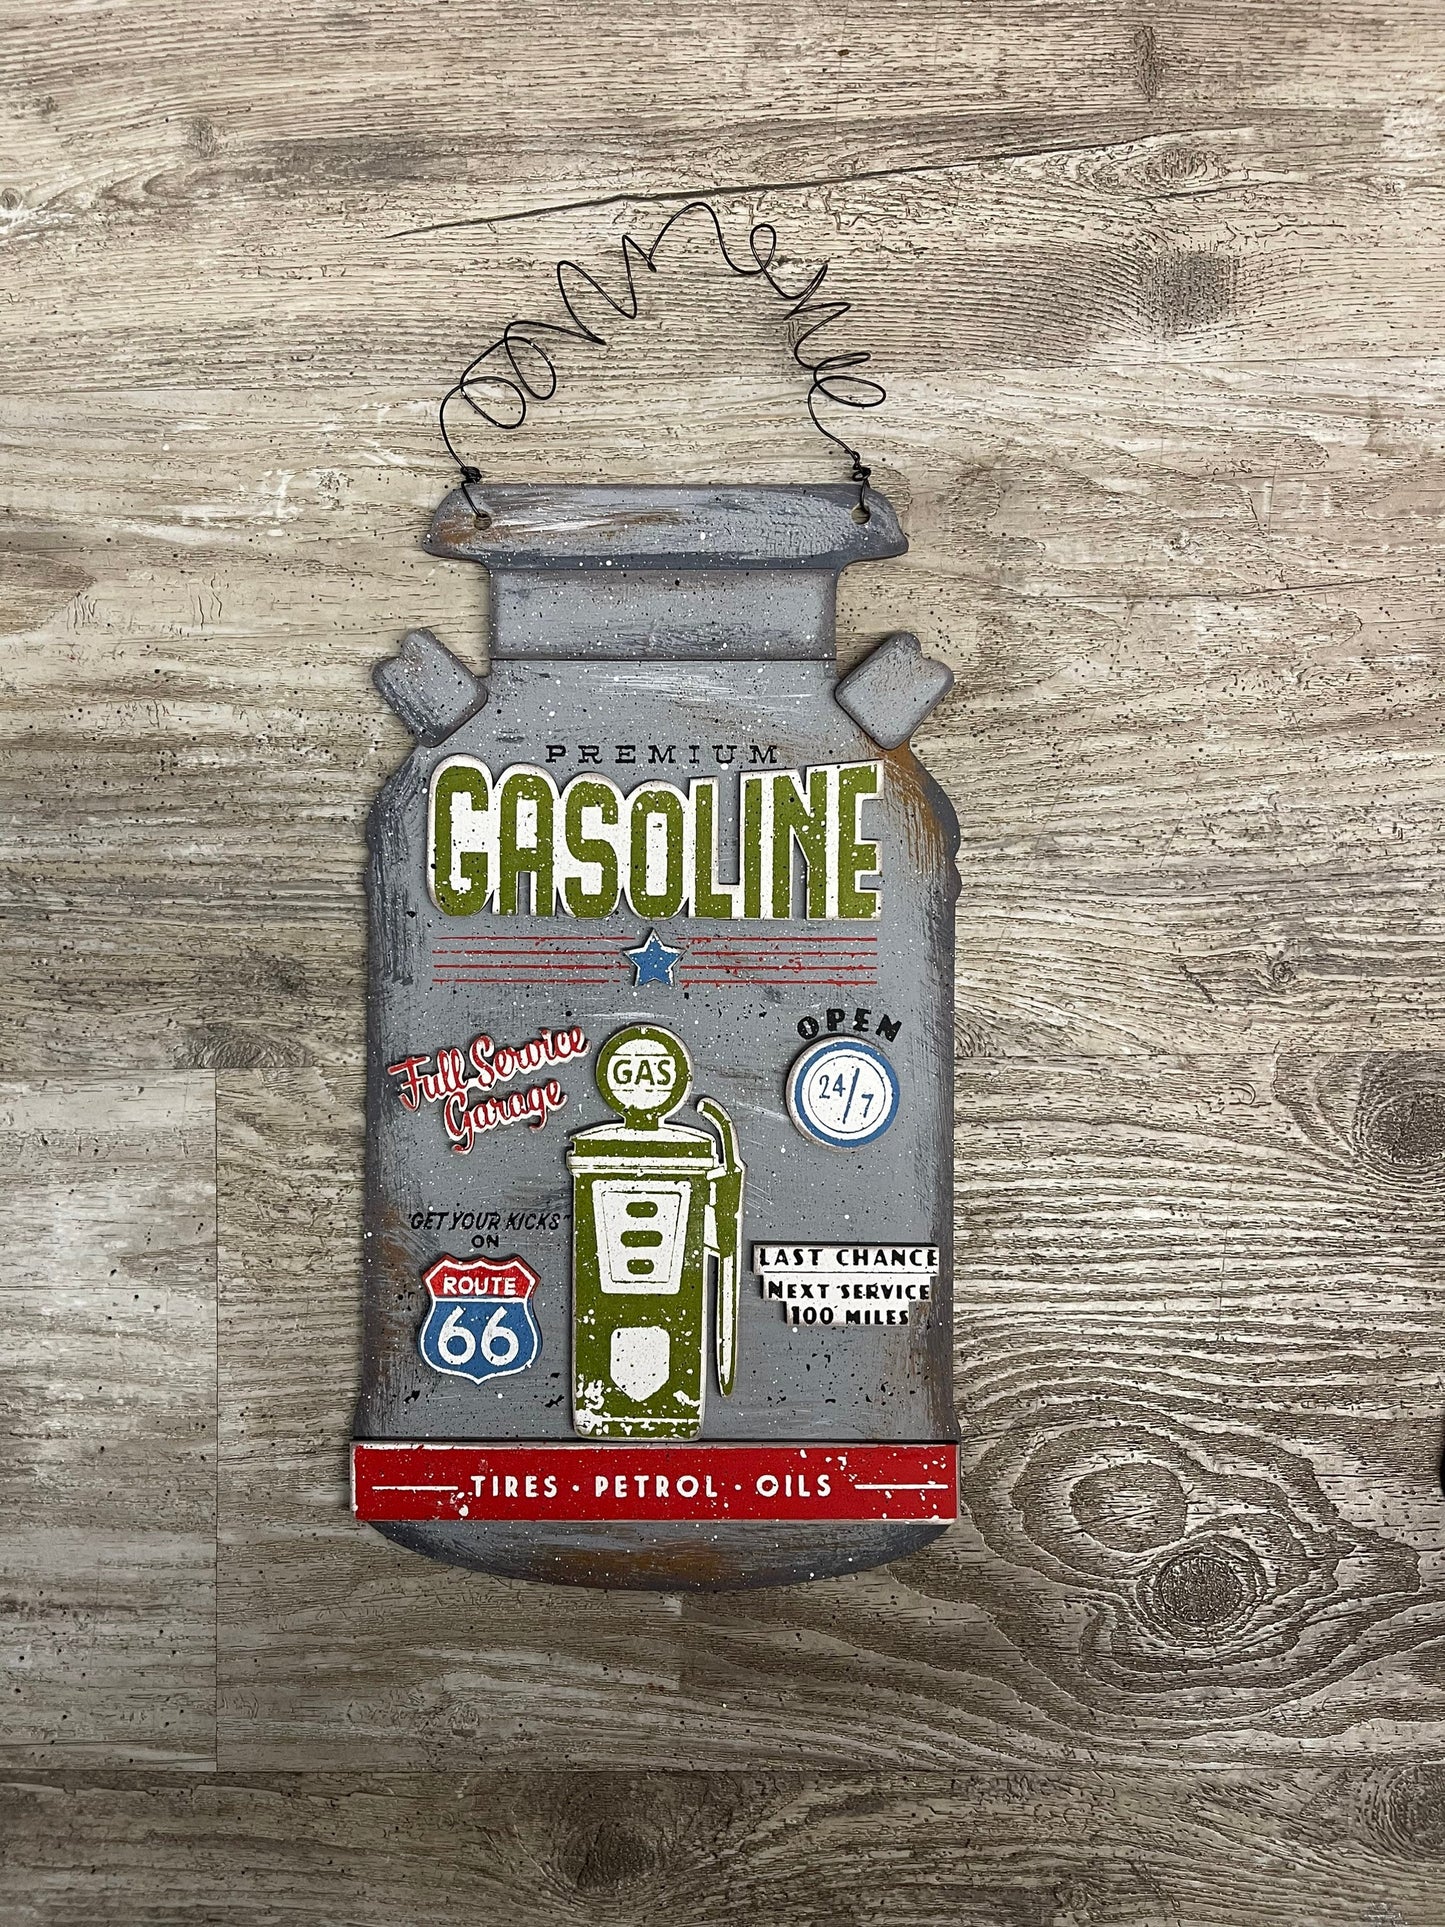 Premium Gasoline Milk Can Kit - unpainted wooden cutouts, ready for you to paint